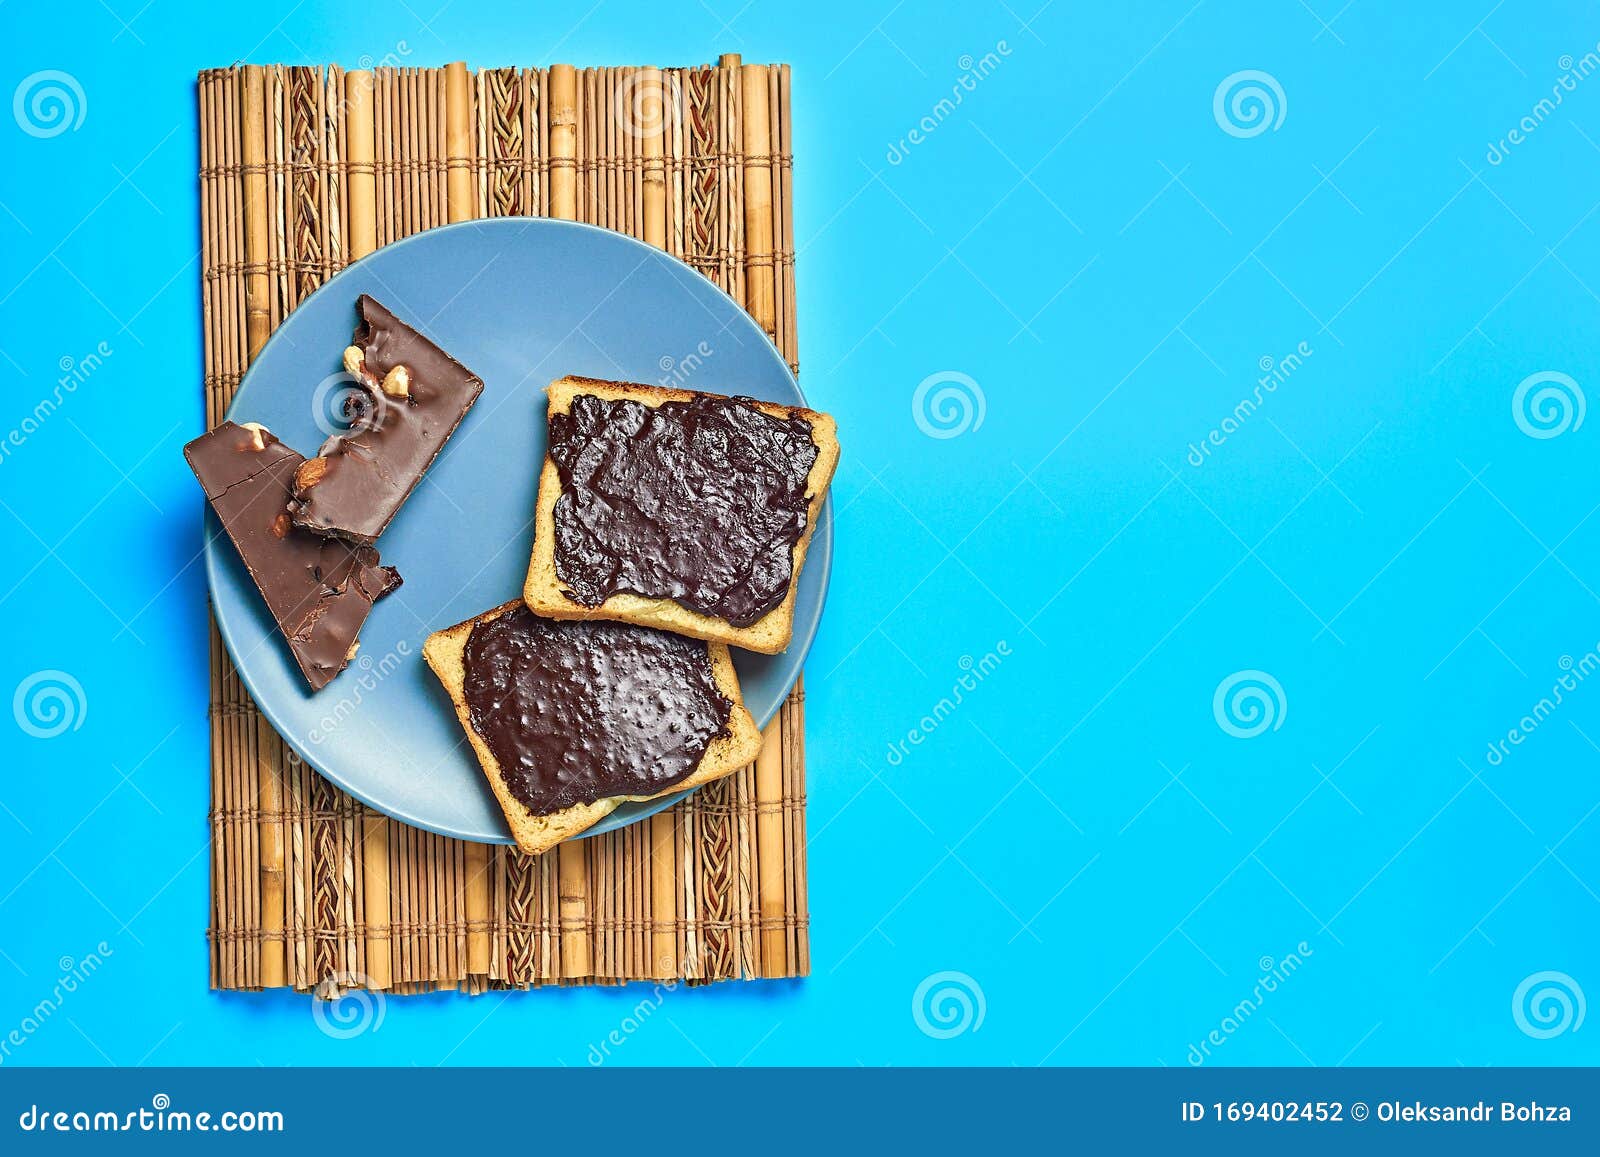 Two Pieces Of Vanilla Bread With Melted Chocolate On Plate And